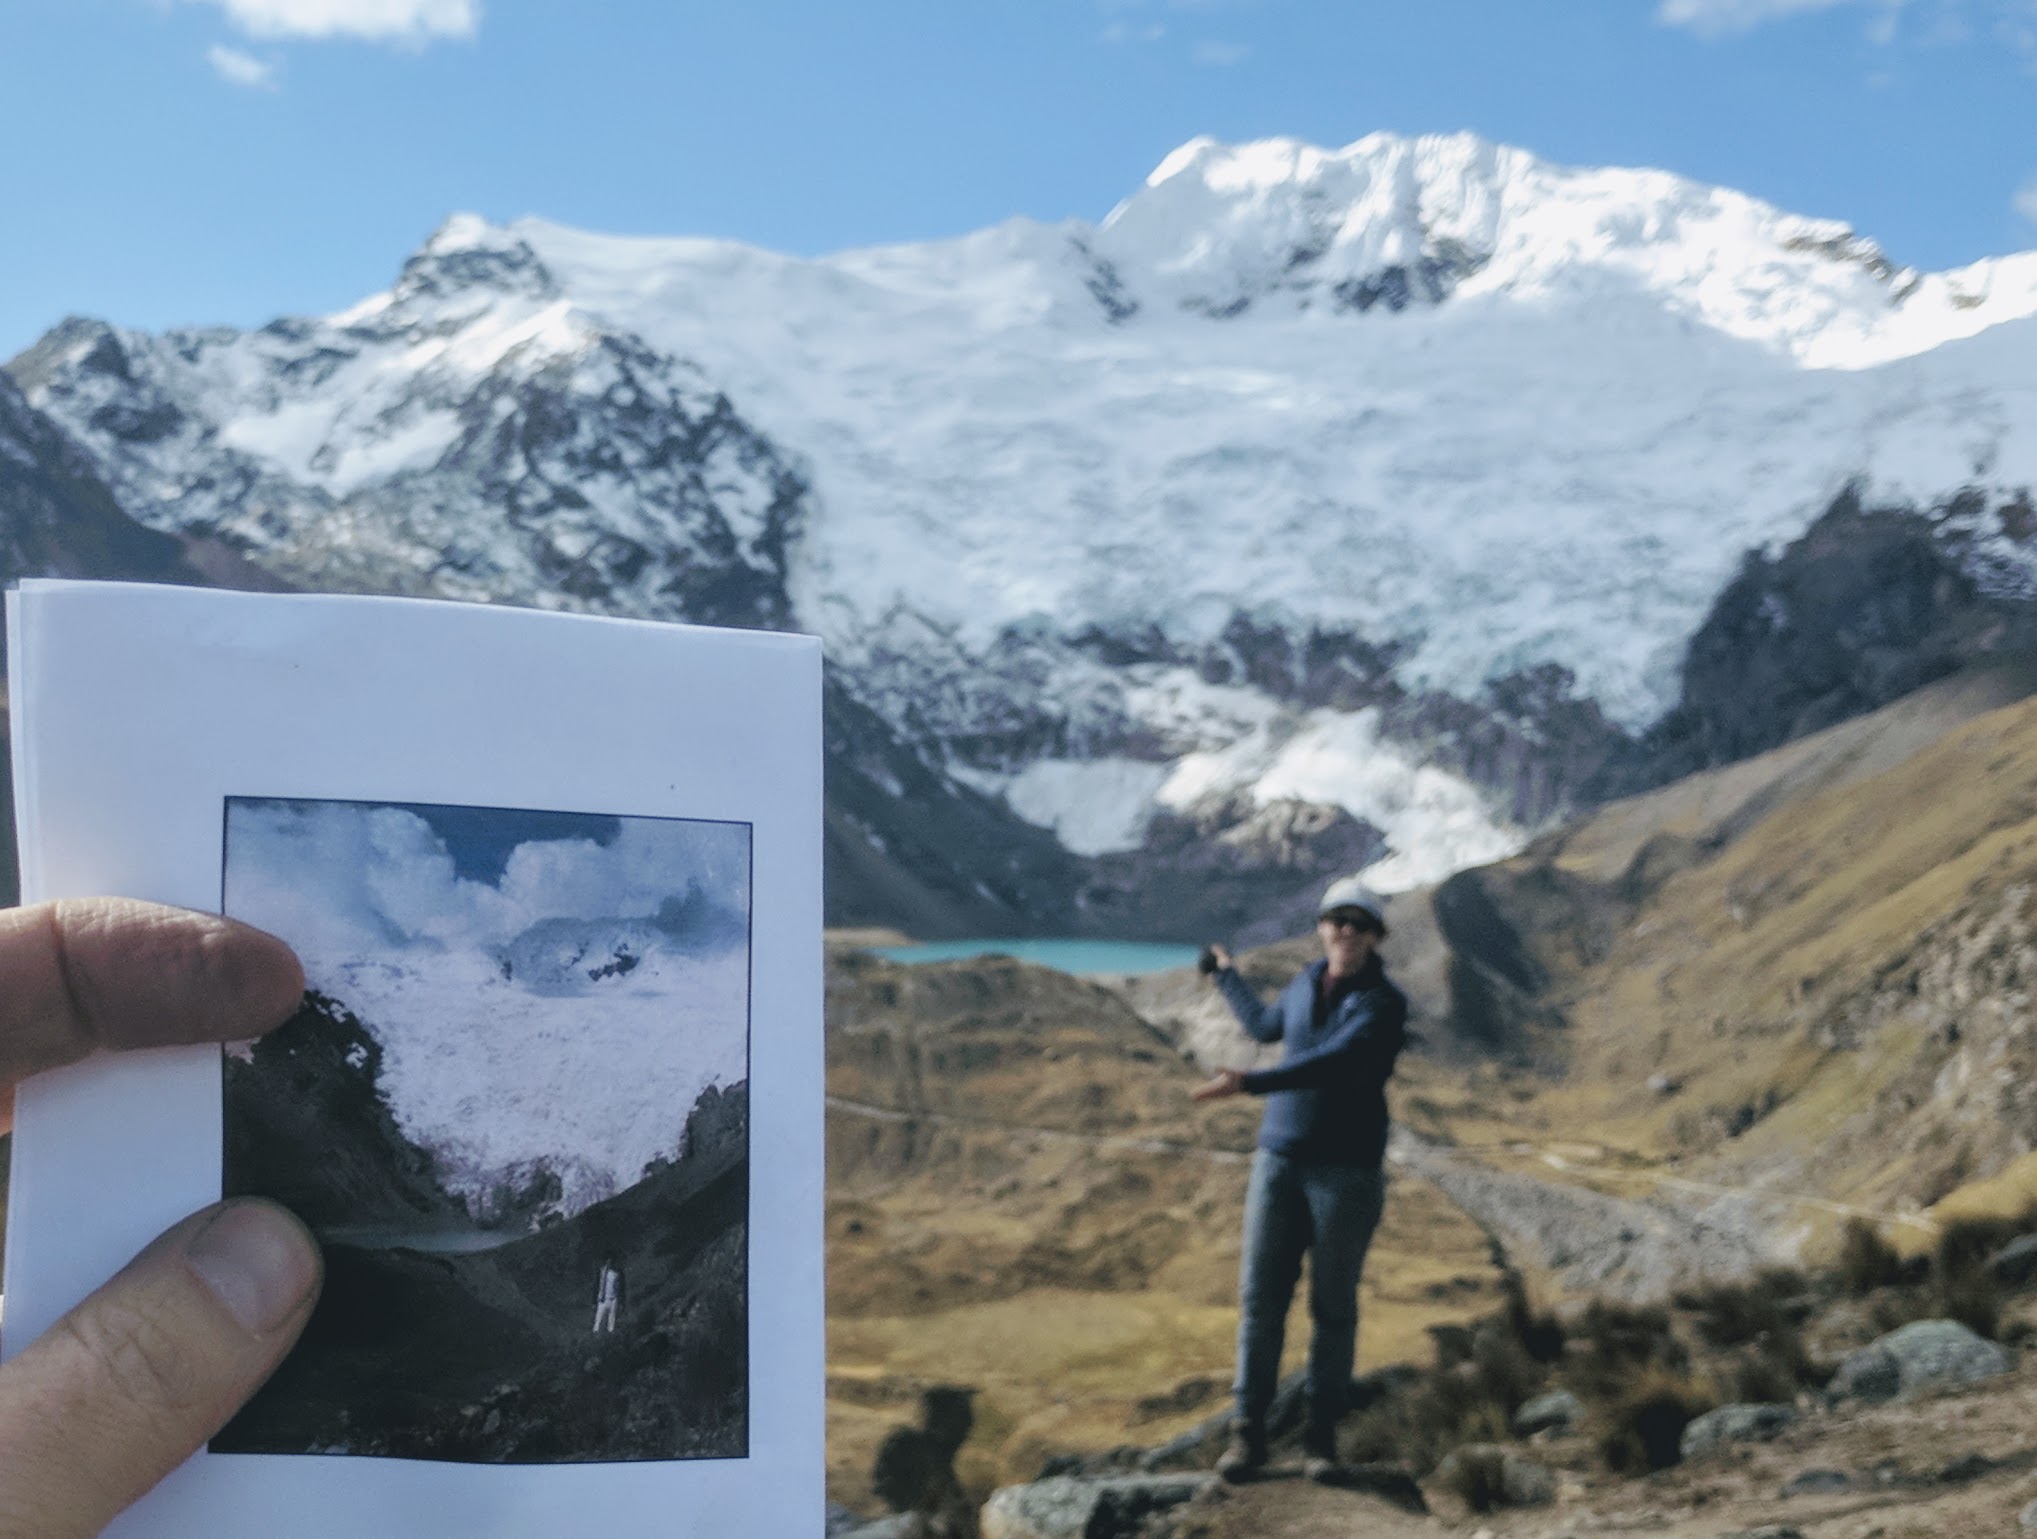 Somers recreates a photo from the 1980's of the  Huaytapallana glacier